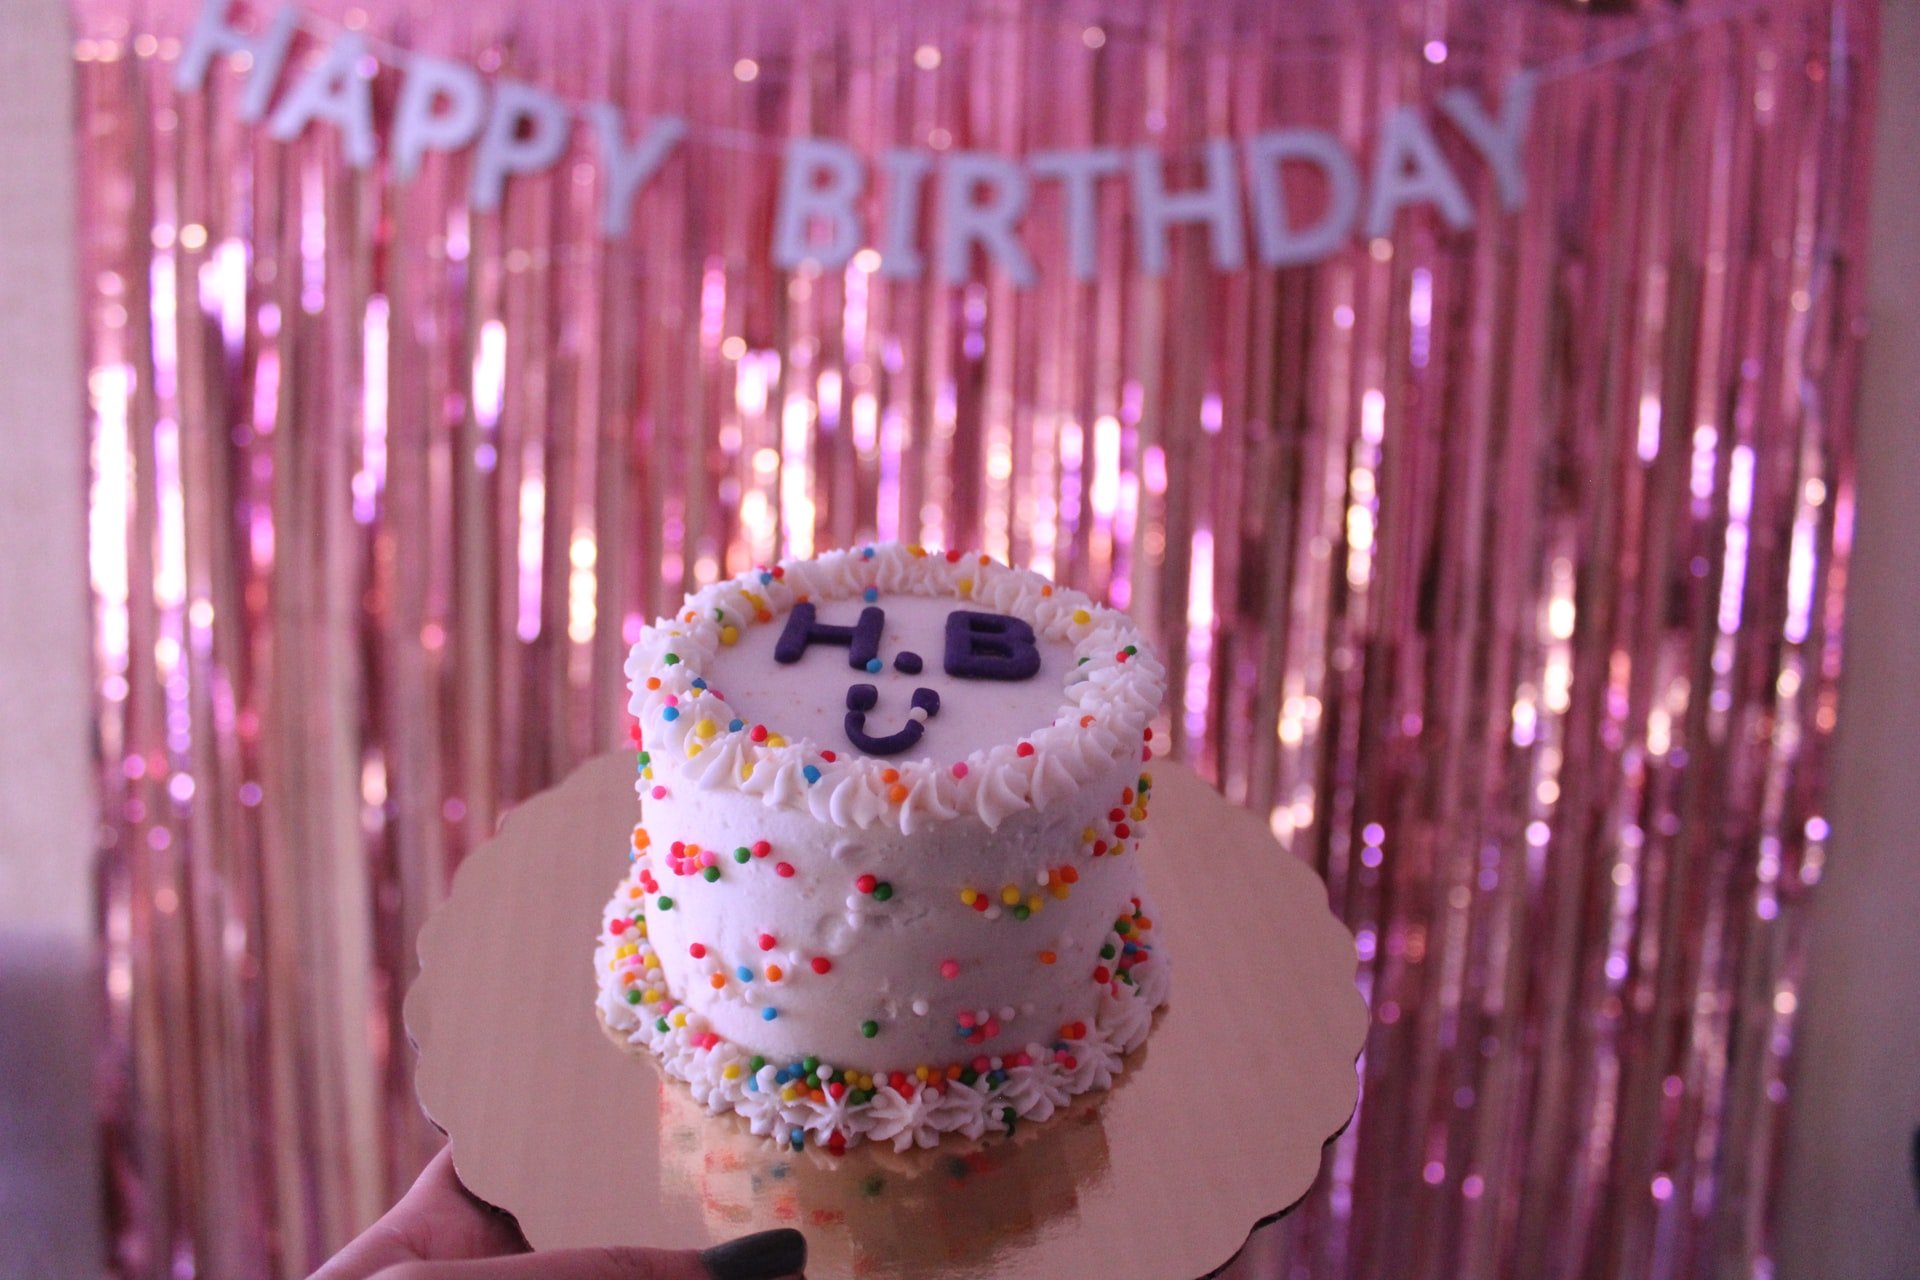 There was a birthday party inside the church | Source: Unsplash